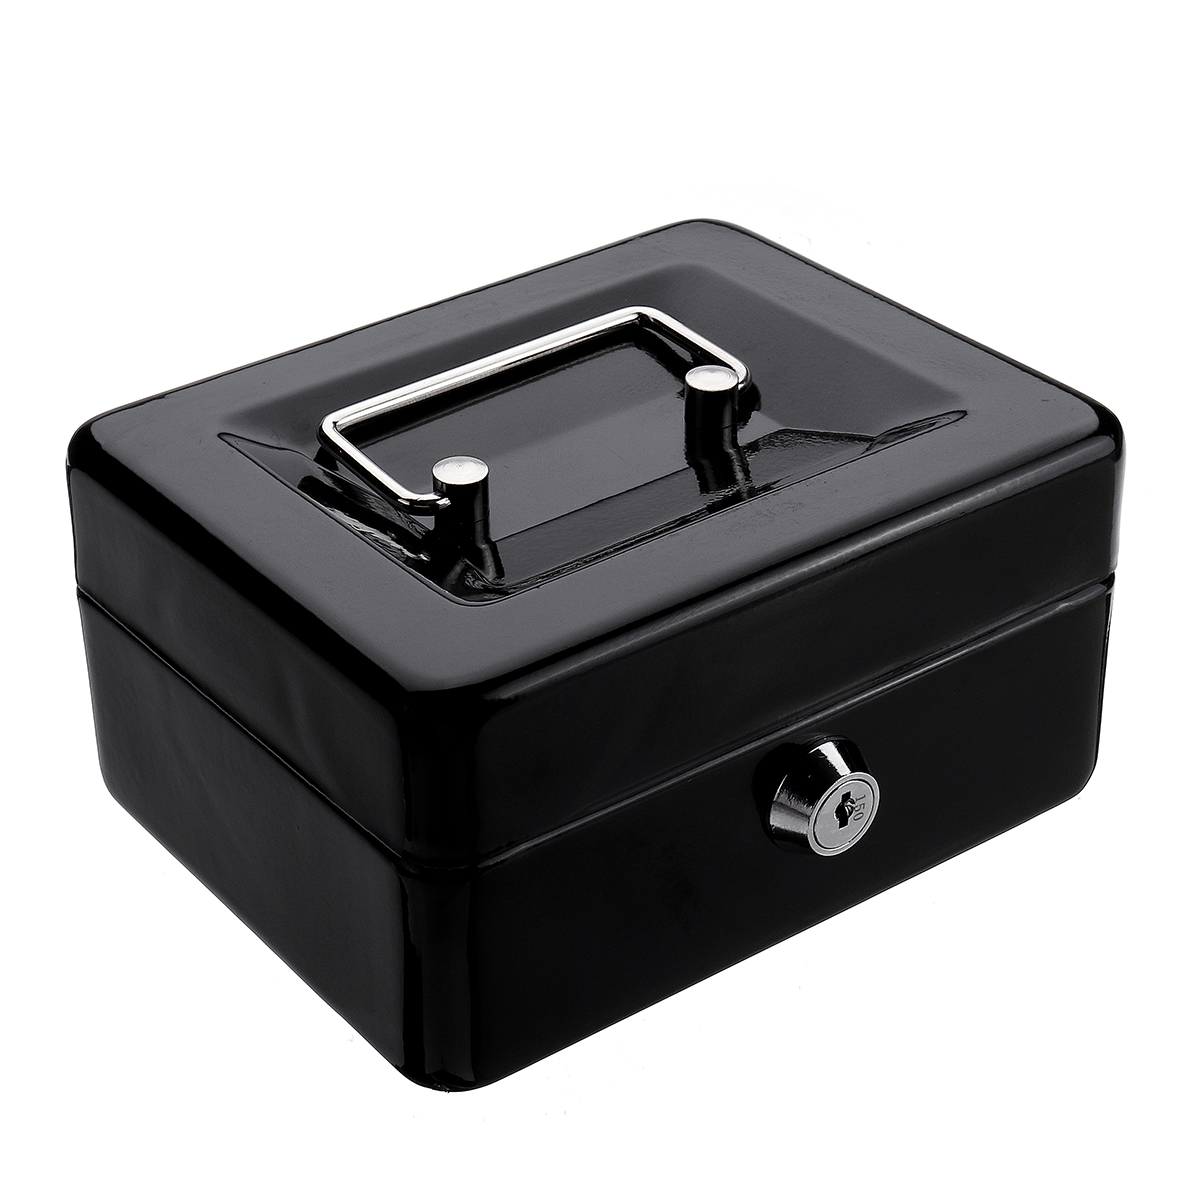 Mini-Portable-Money-Safe-Storage-Case-Black-Sturdy-Metal-With-Coin-Tray-Cash-Carry-Box-1346714-4